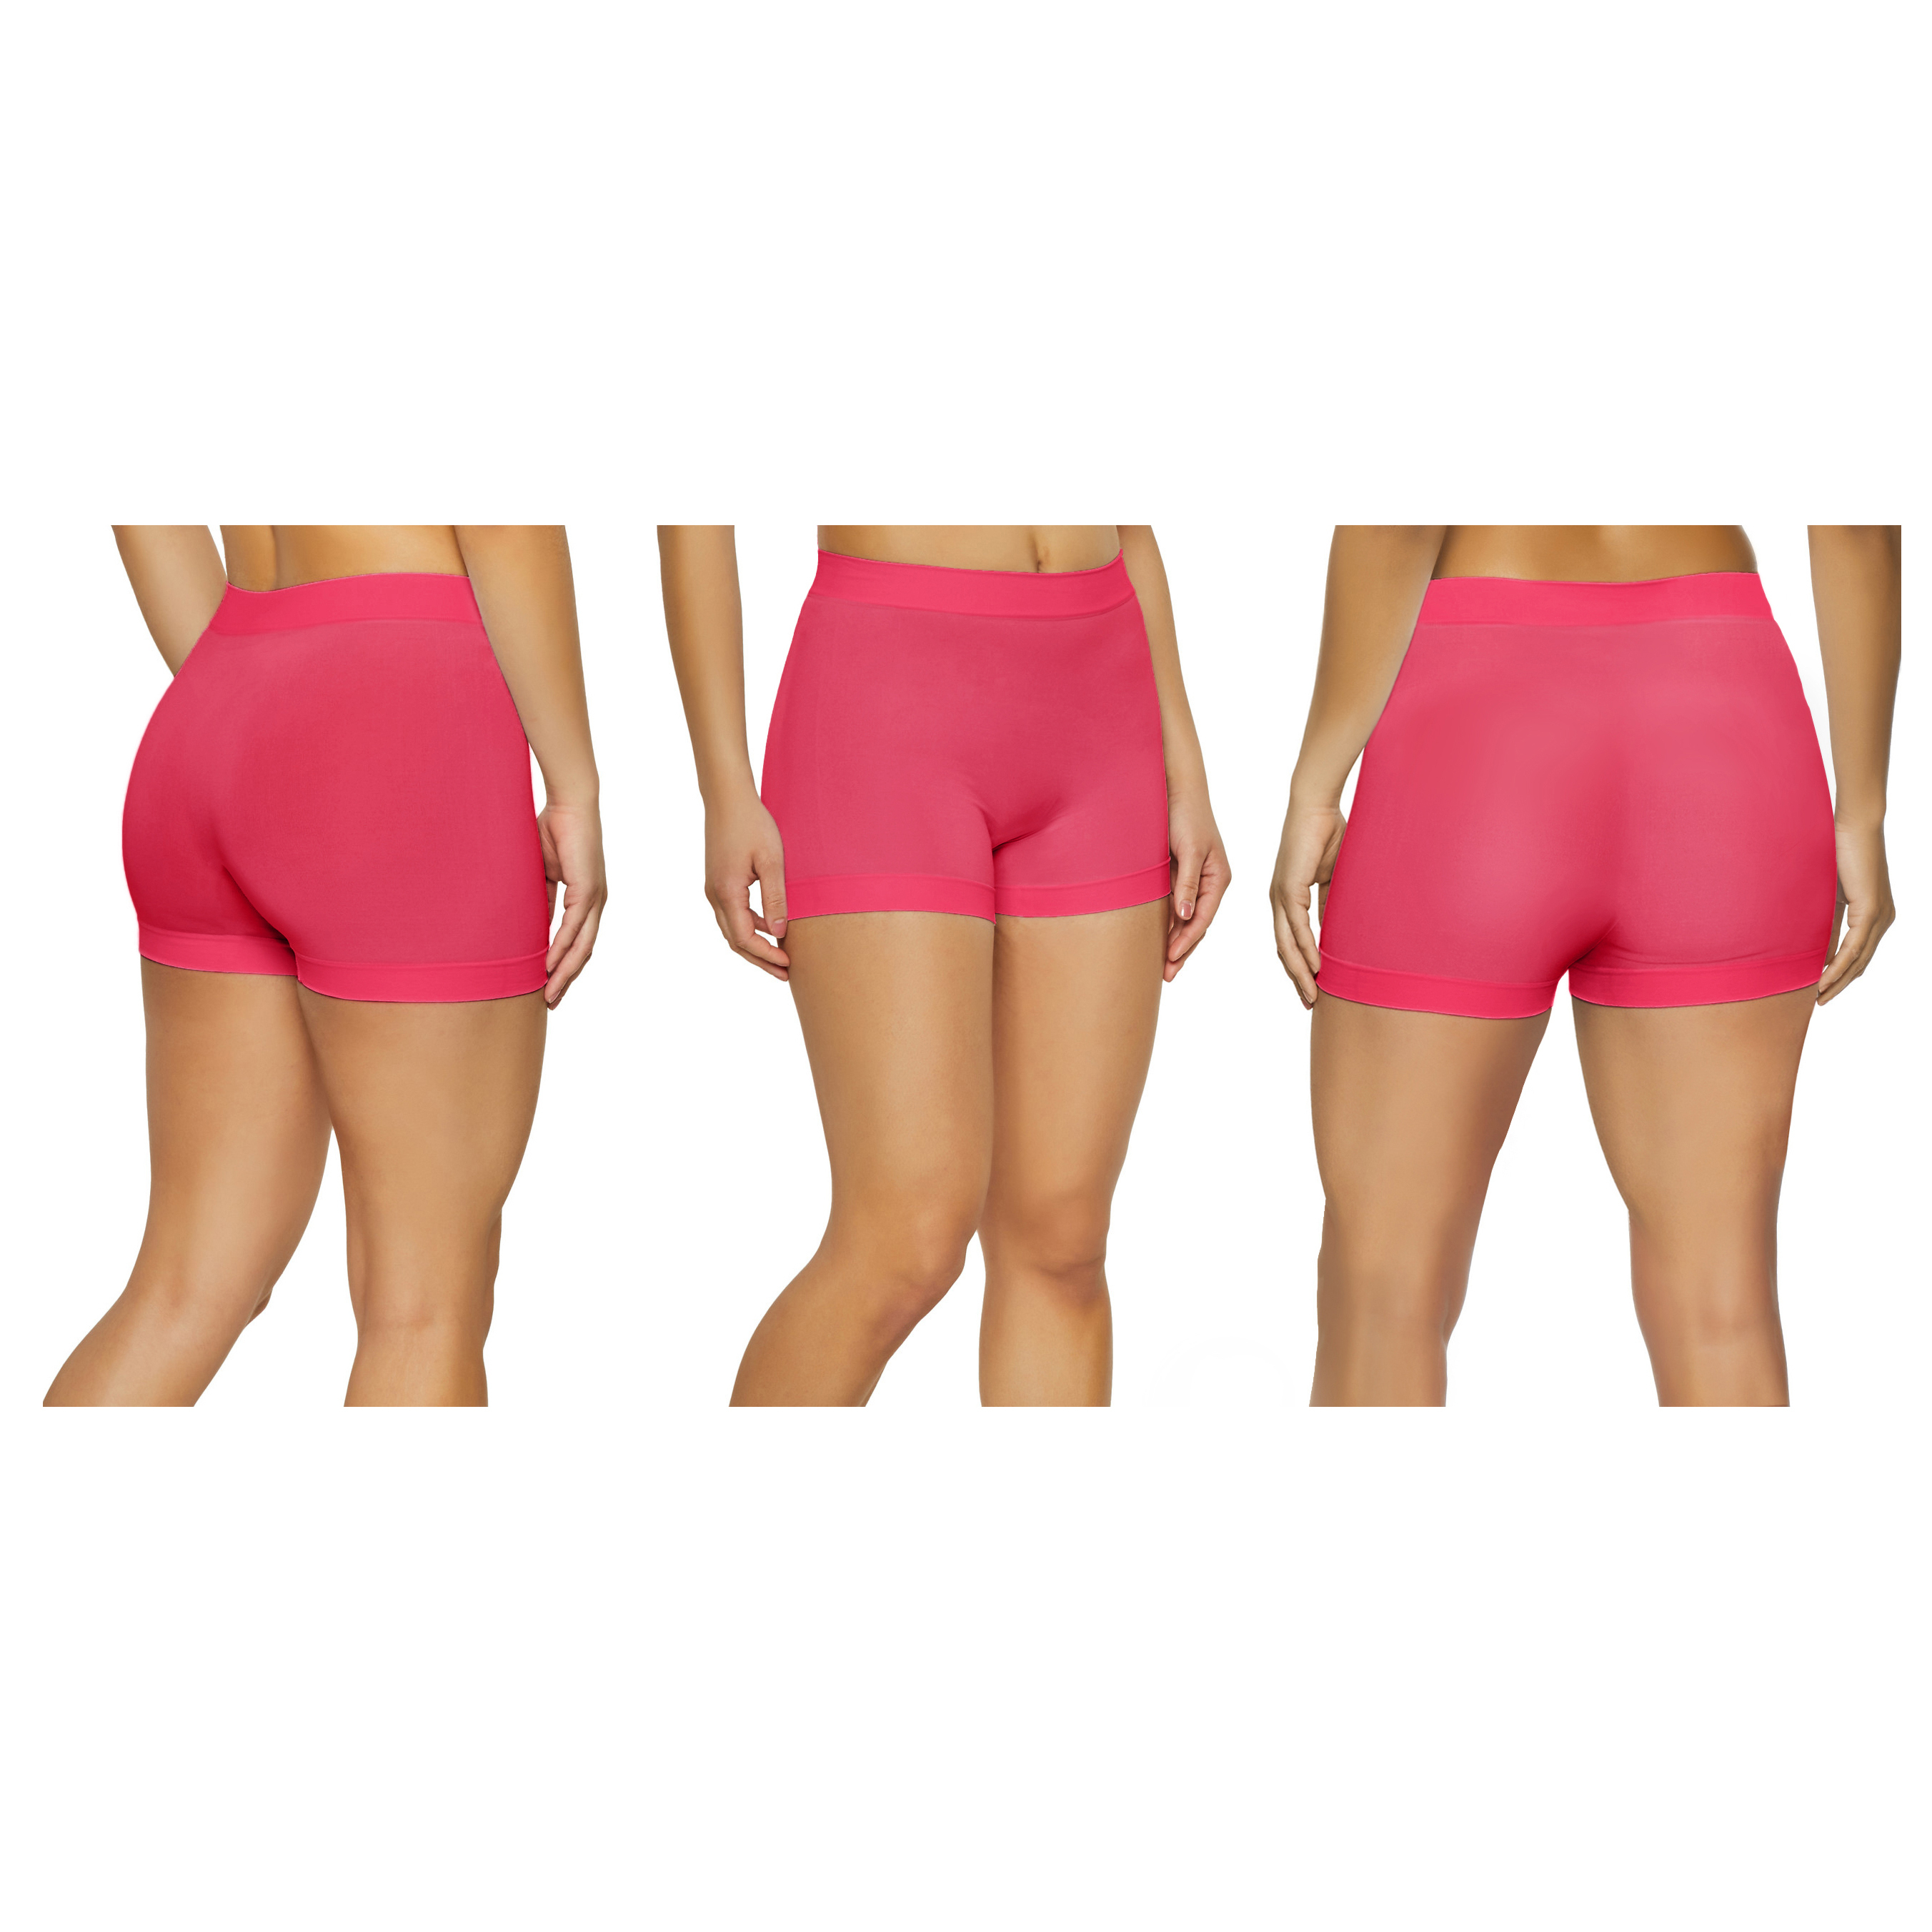 12-Pack Women's High Waisted Biker Bottom Shorts For Yoga Gym Running Ladies Pants - ASSORTED, M